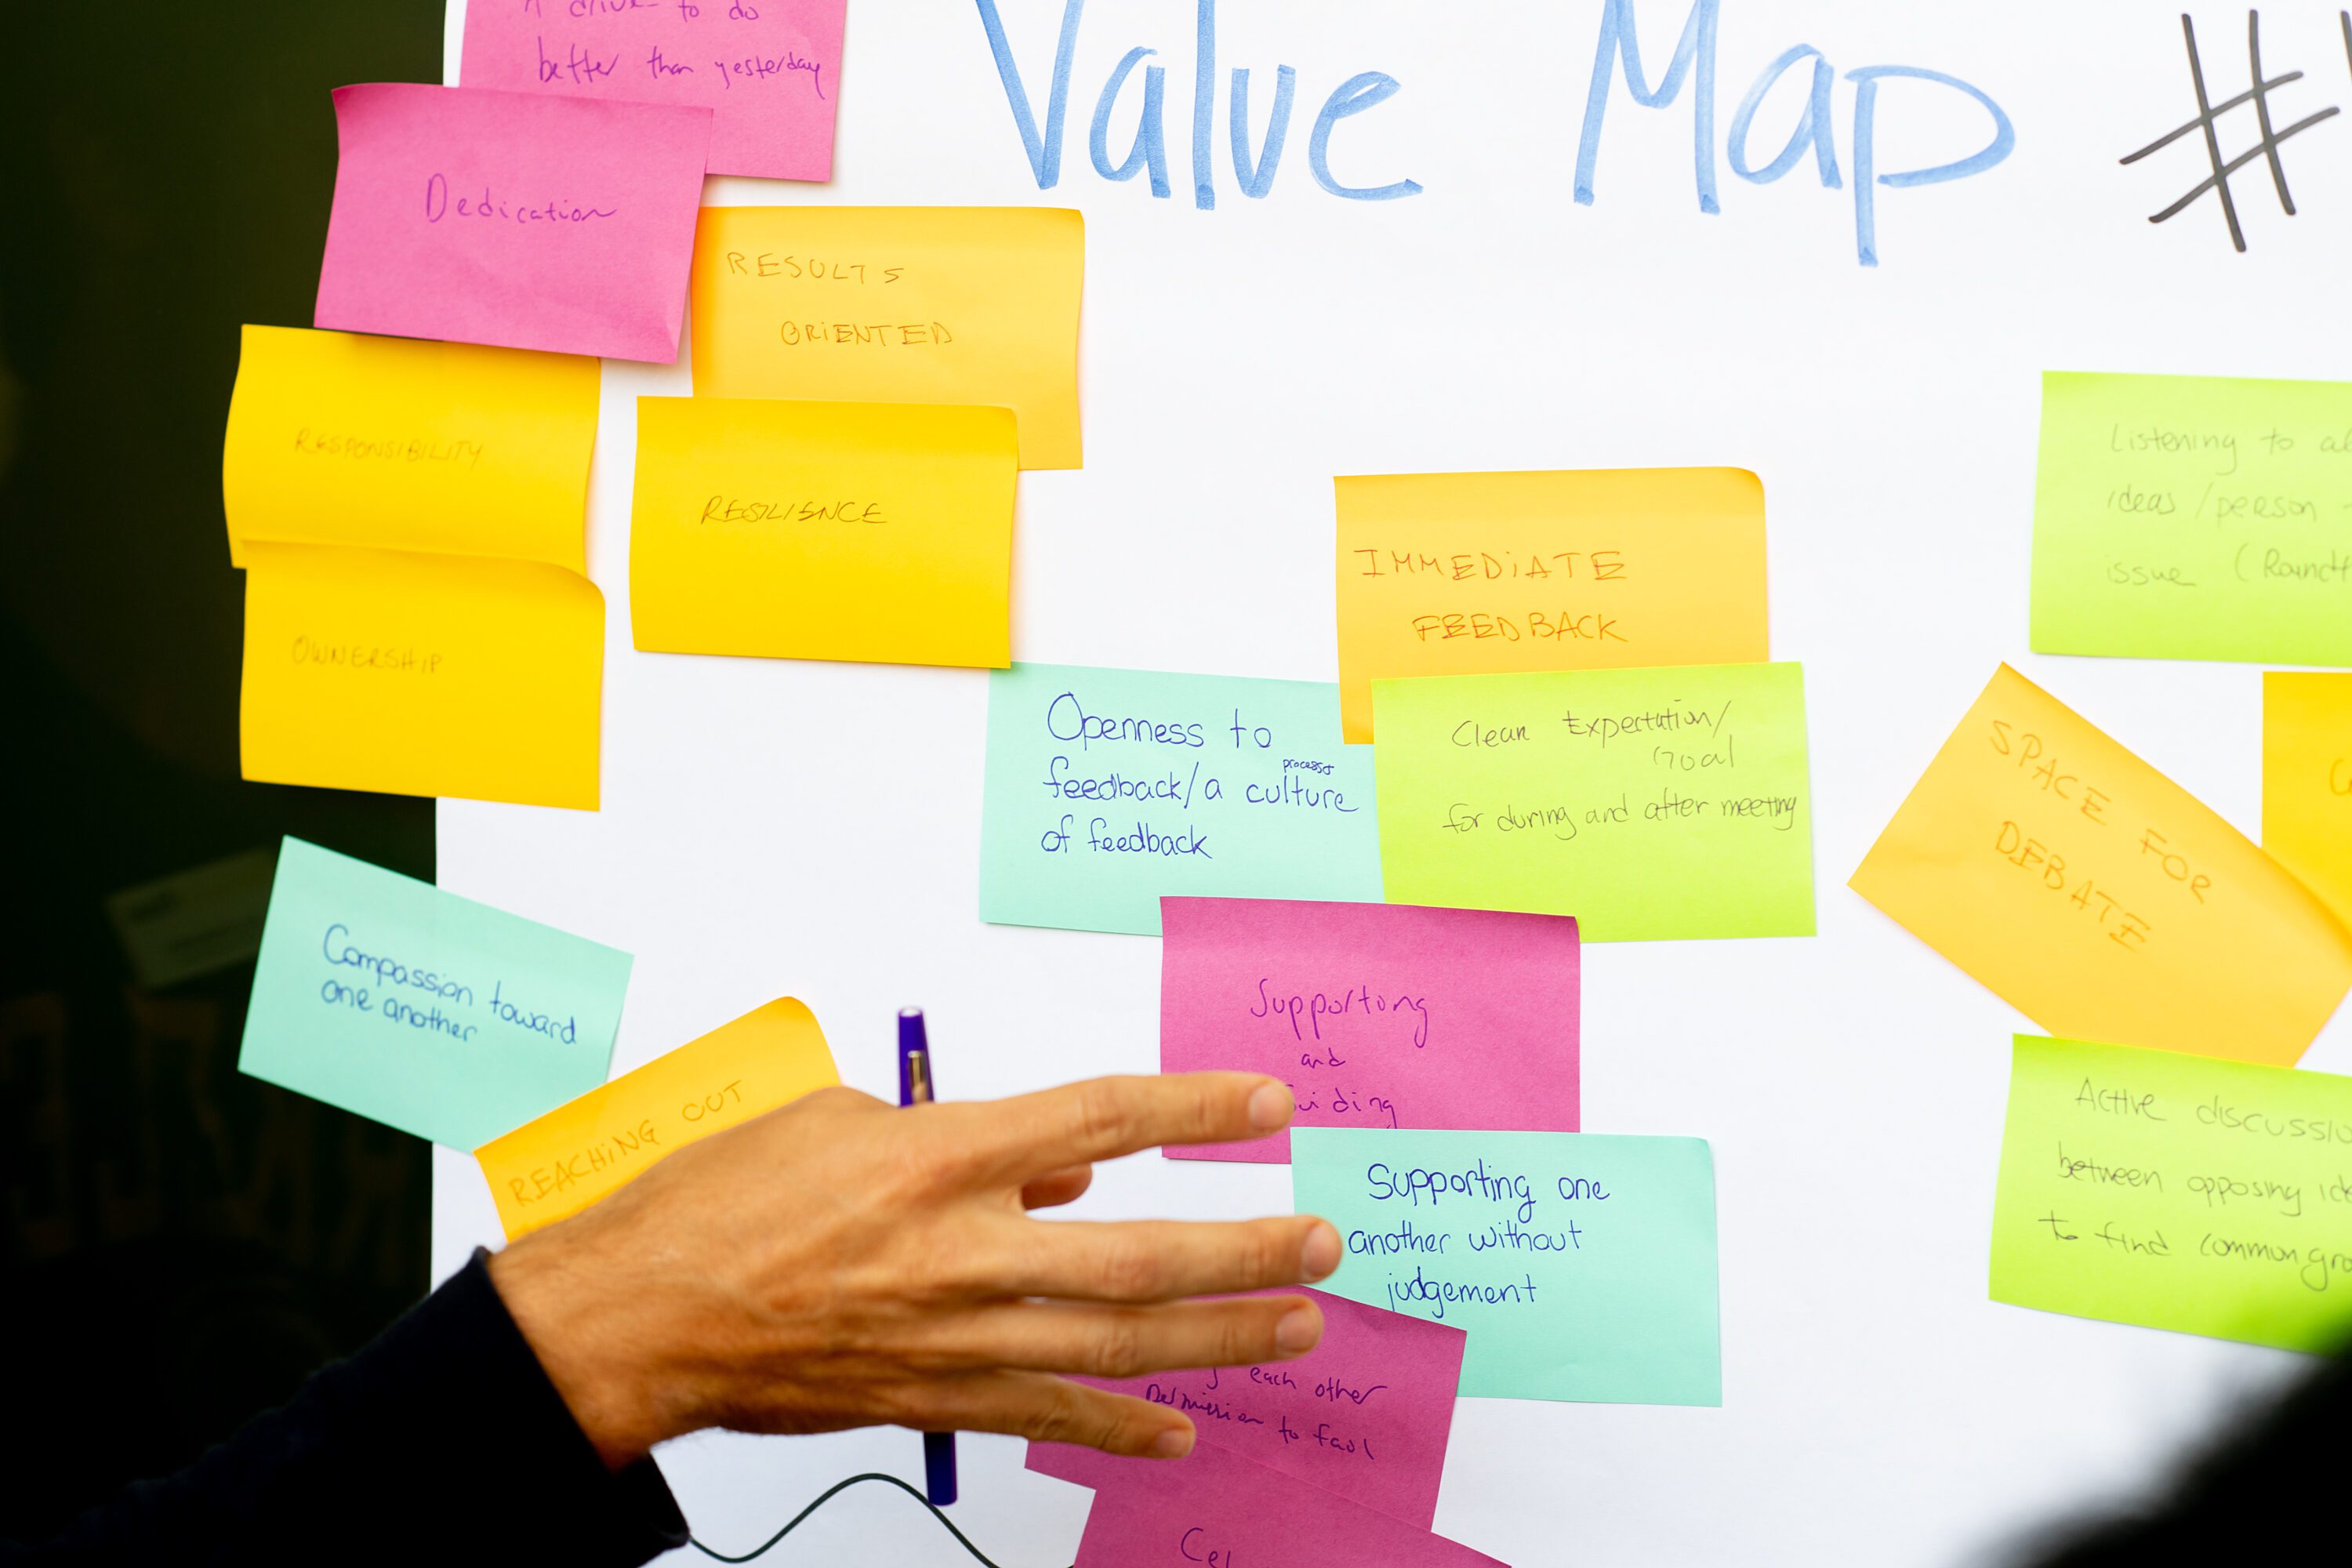 Post-it notes on a whiteboard show a value map. A hand reaches toward a Post-it that says "supporting one another without judgement."